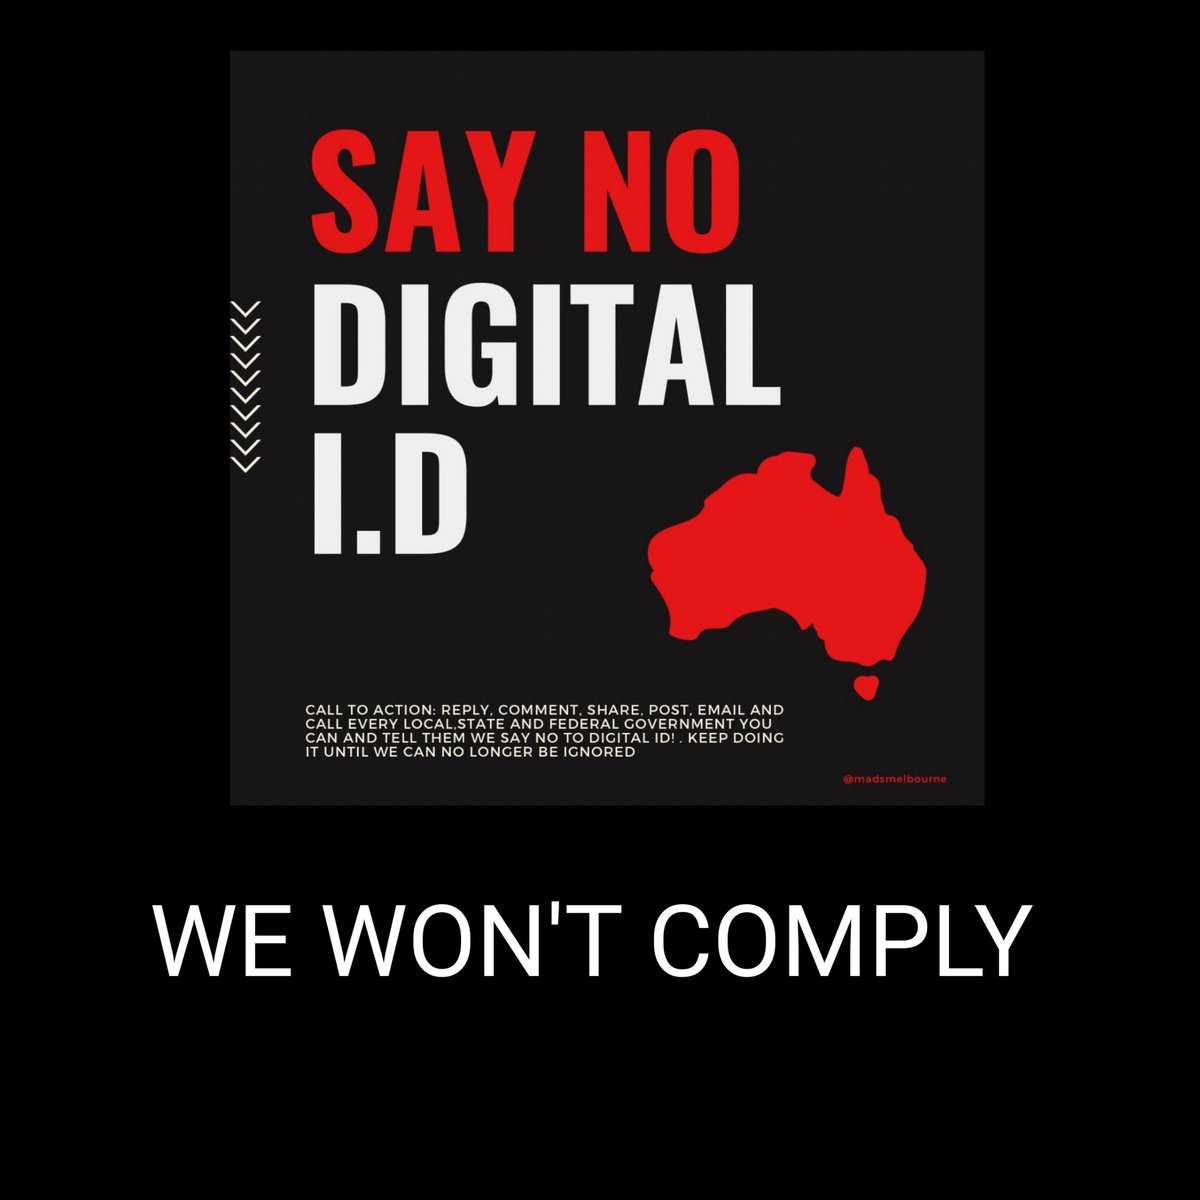 #Radio #Australis 

Digital ID protests happening in all capital cities today. Wish I was there.

#nodigitalID